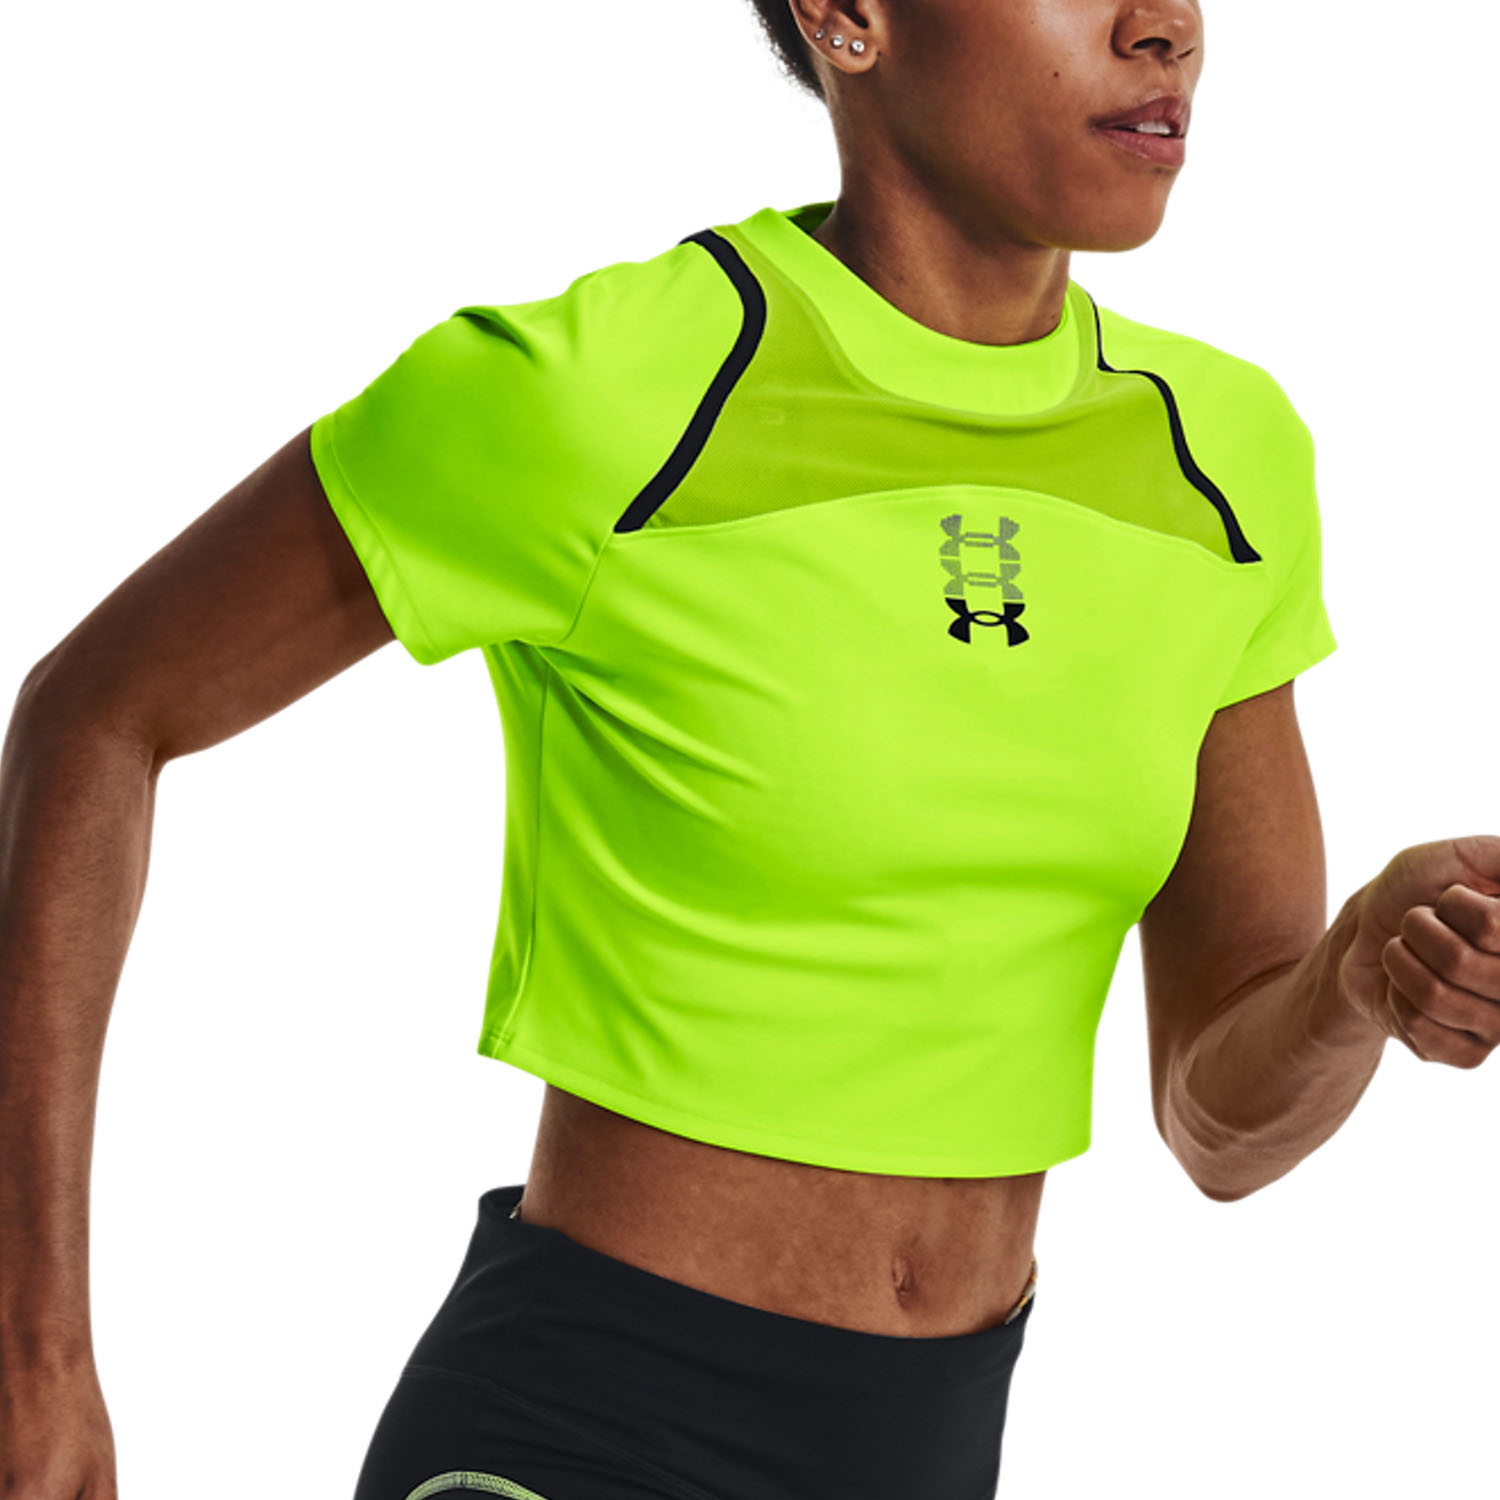 Under Armour Anywhere Maglietta - Lime Surge/Black